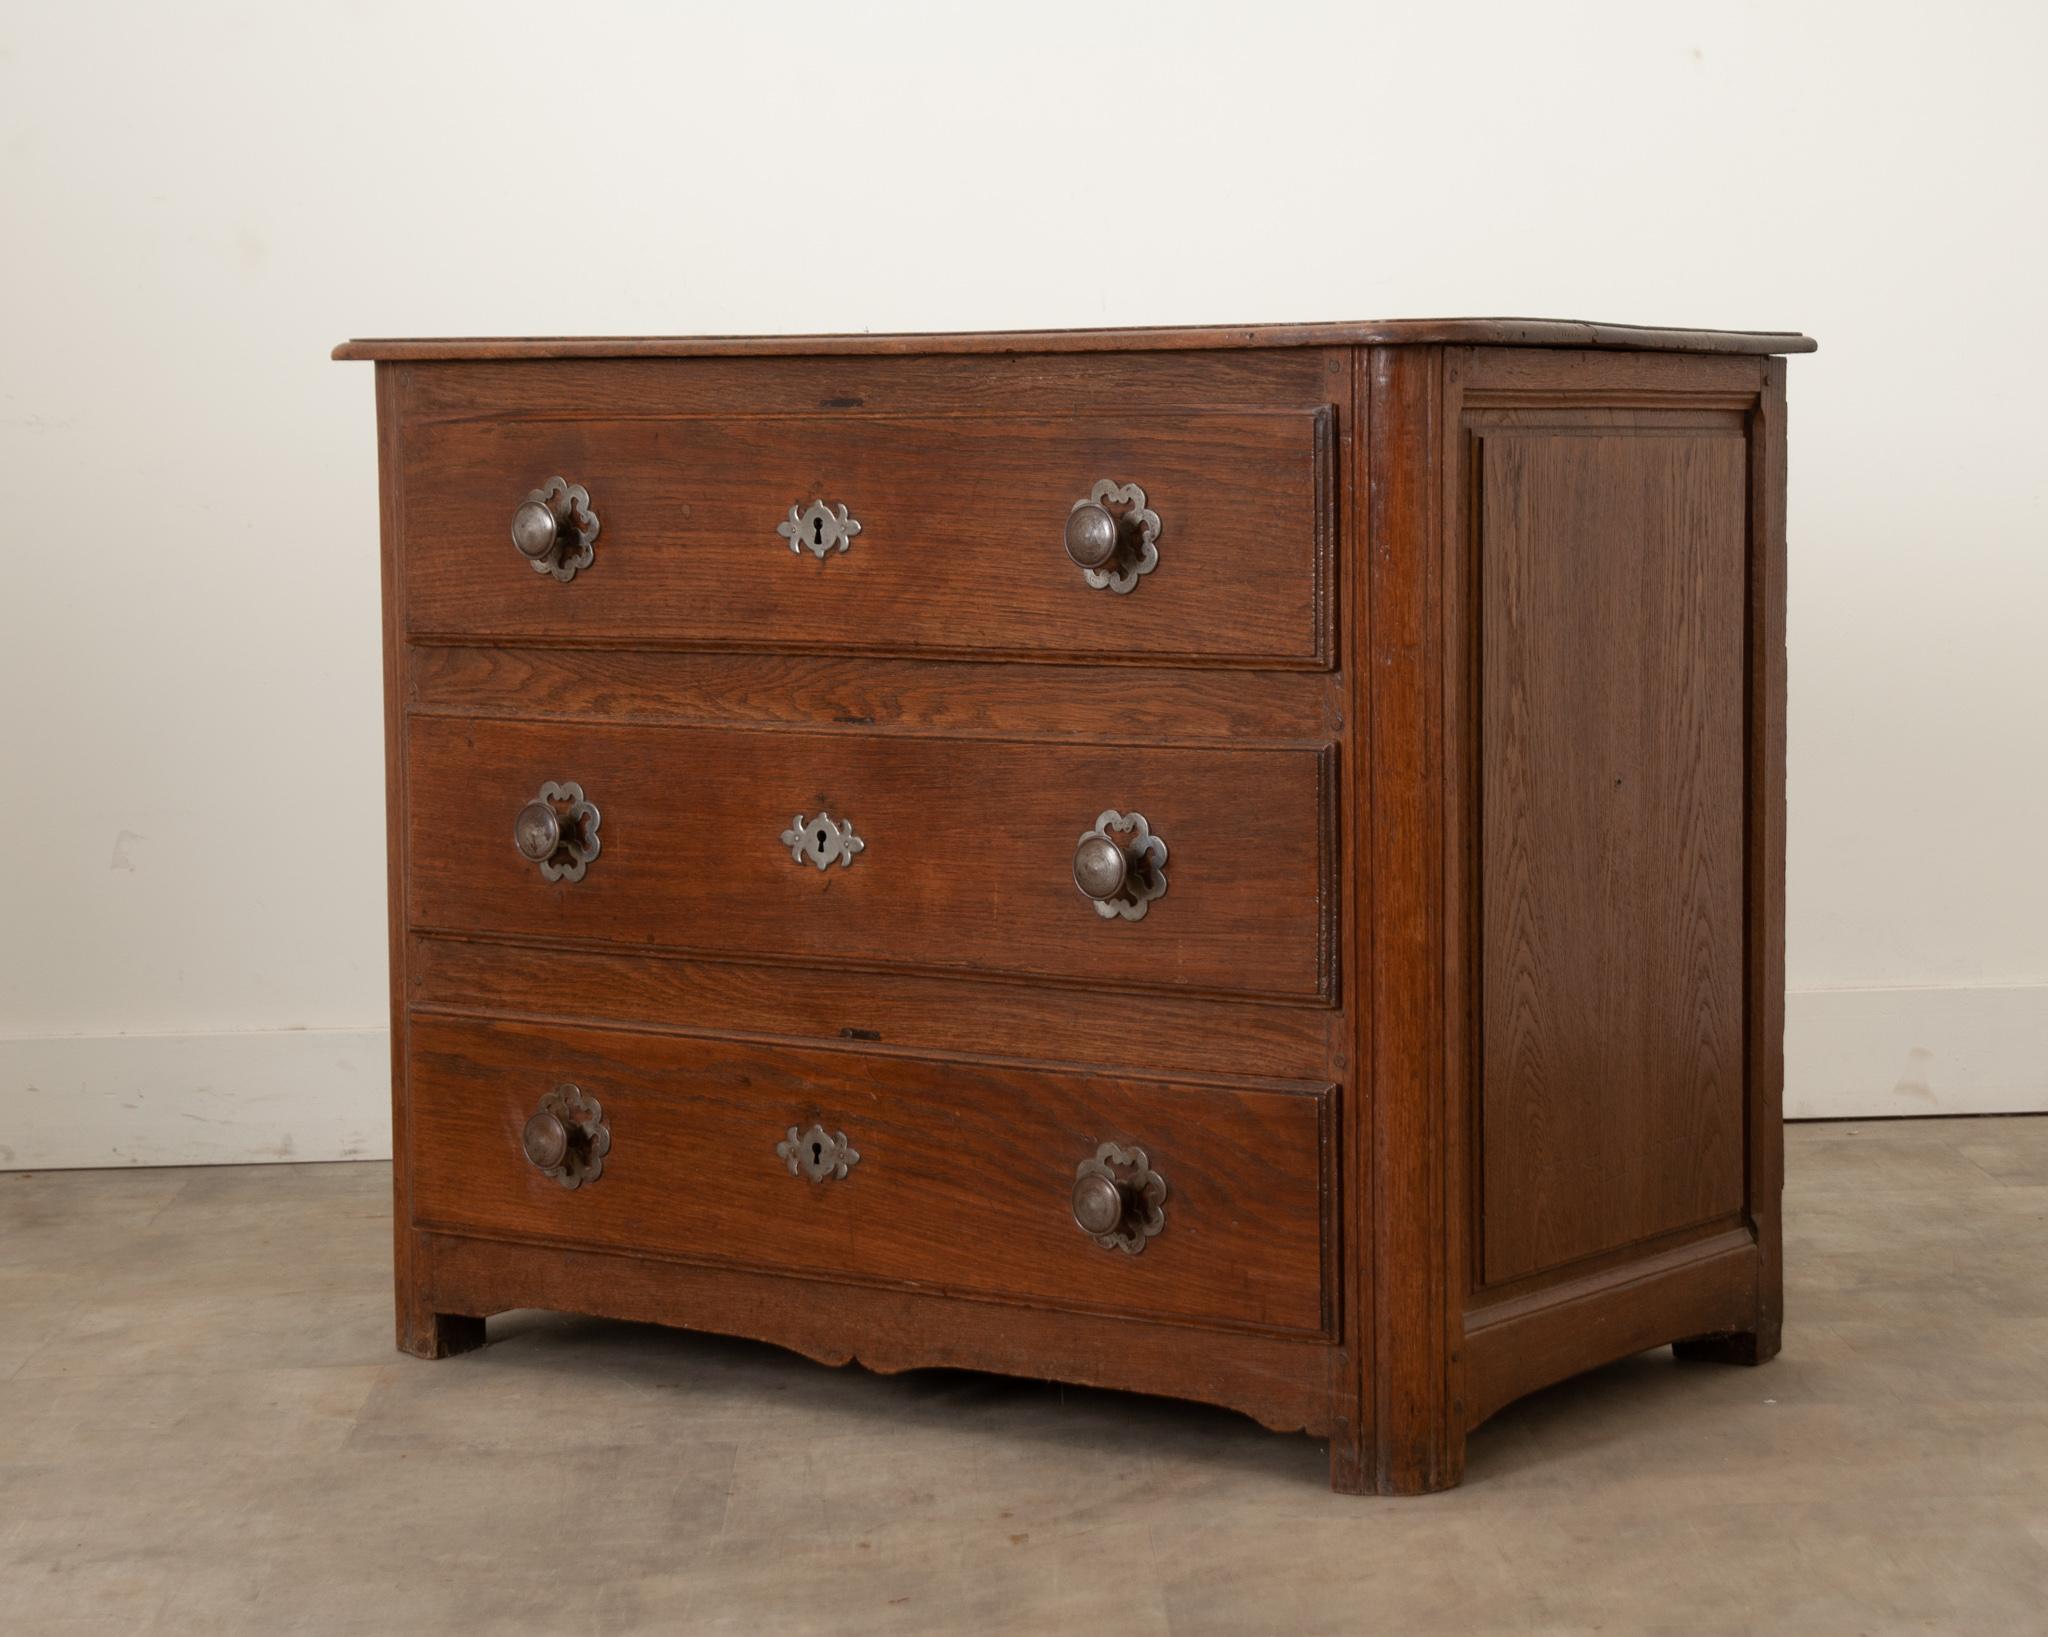 French 18th Century Solid Oak Commode In Good Condition For Sale In Baton Rouge, LA